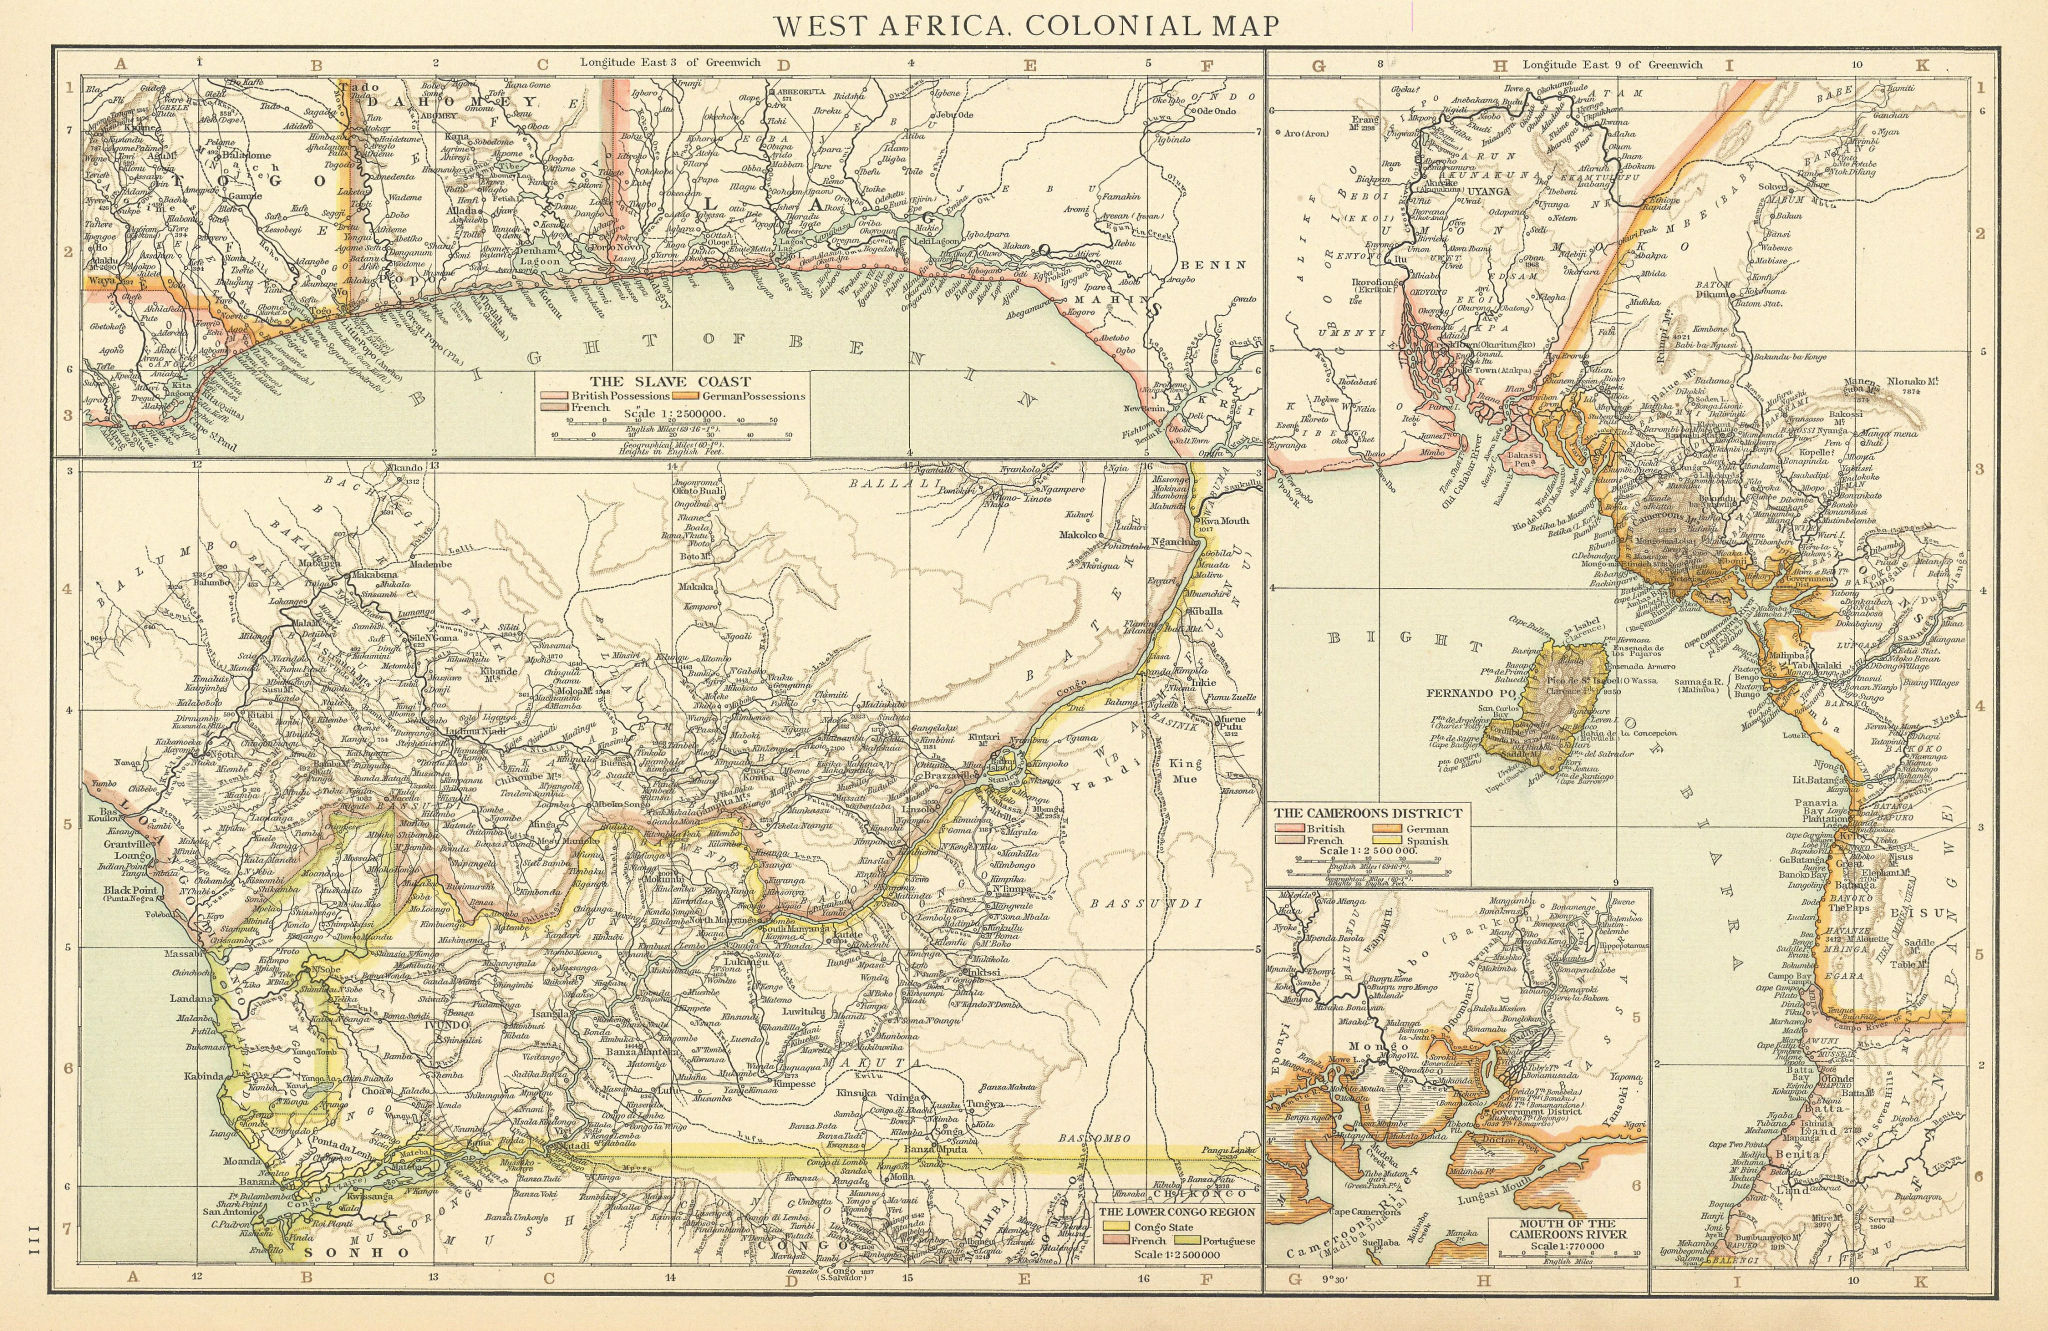 Associate Product Colonial West Africa. Nigeria Cameroon Congo. British German. TIMES 1895 map